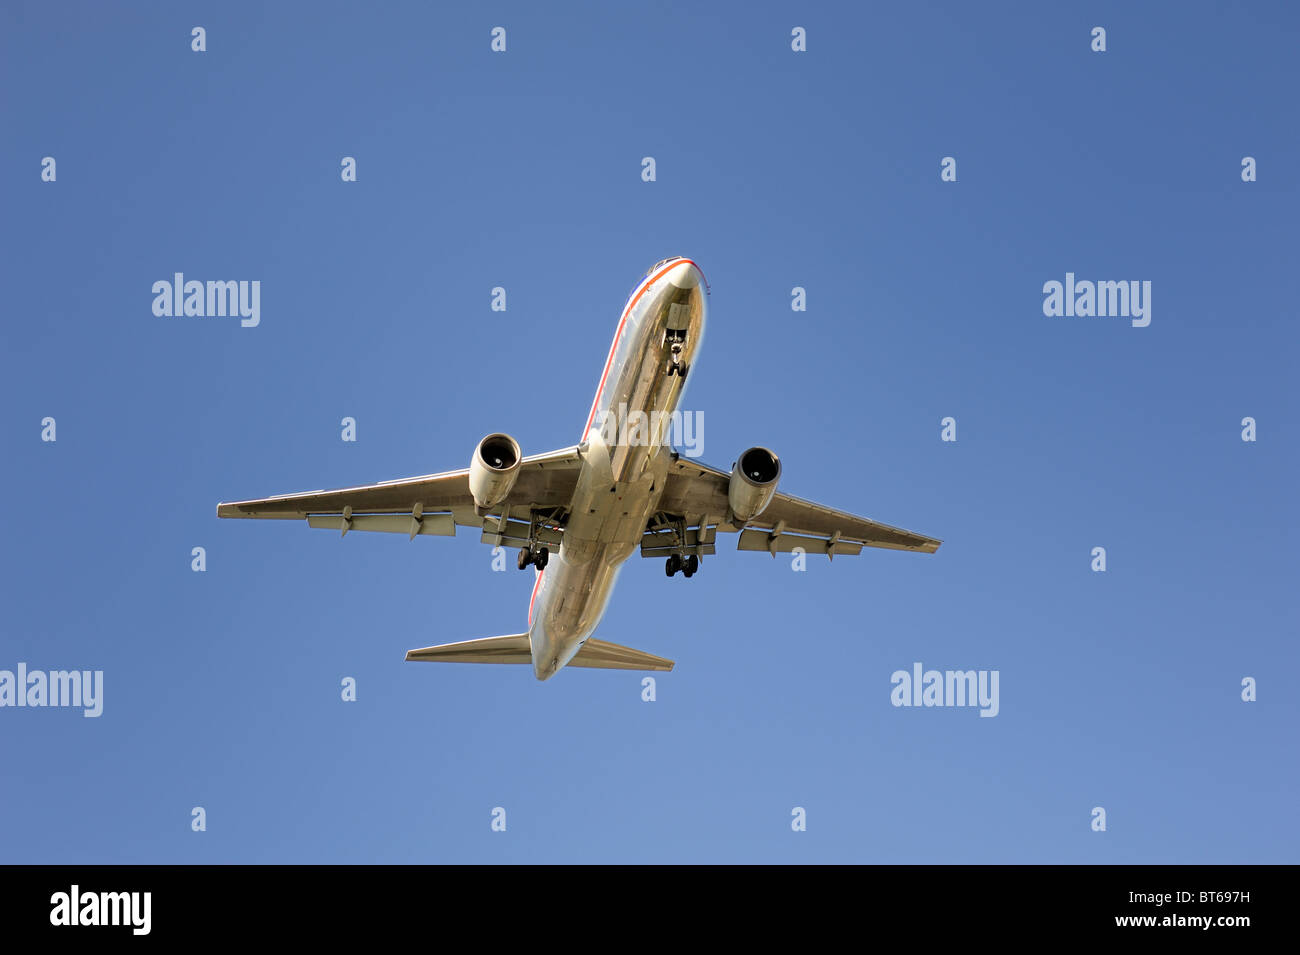 American airlines passenger jet coming into land Stock Photo